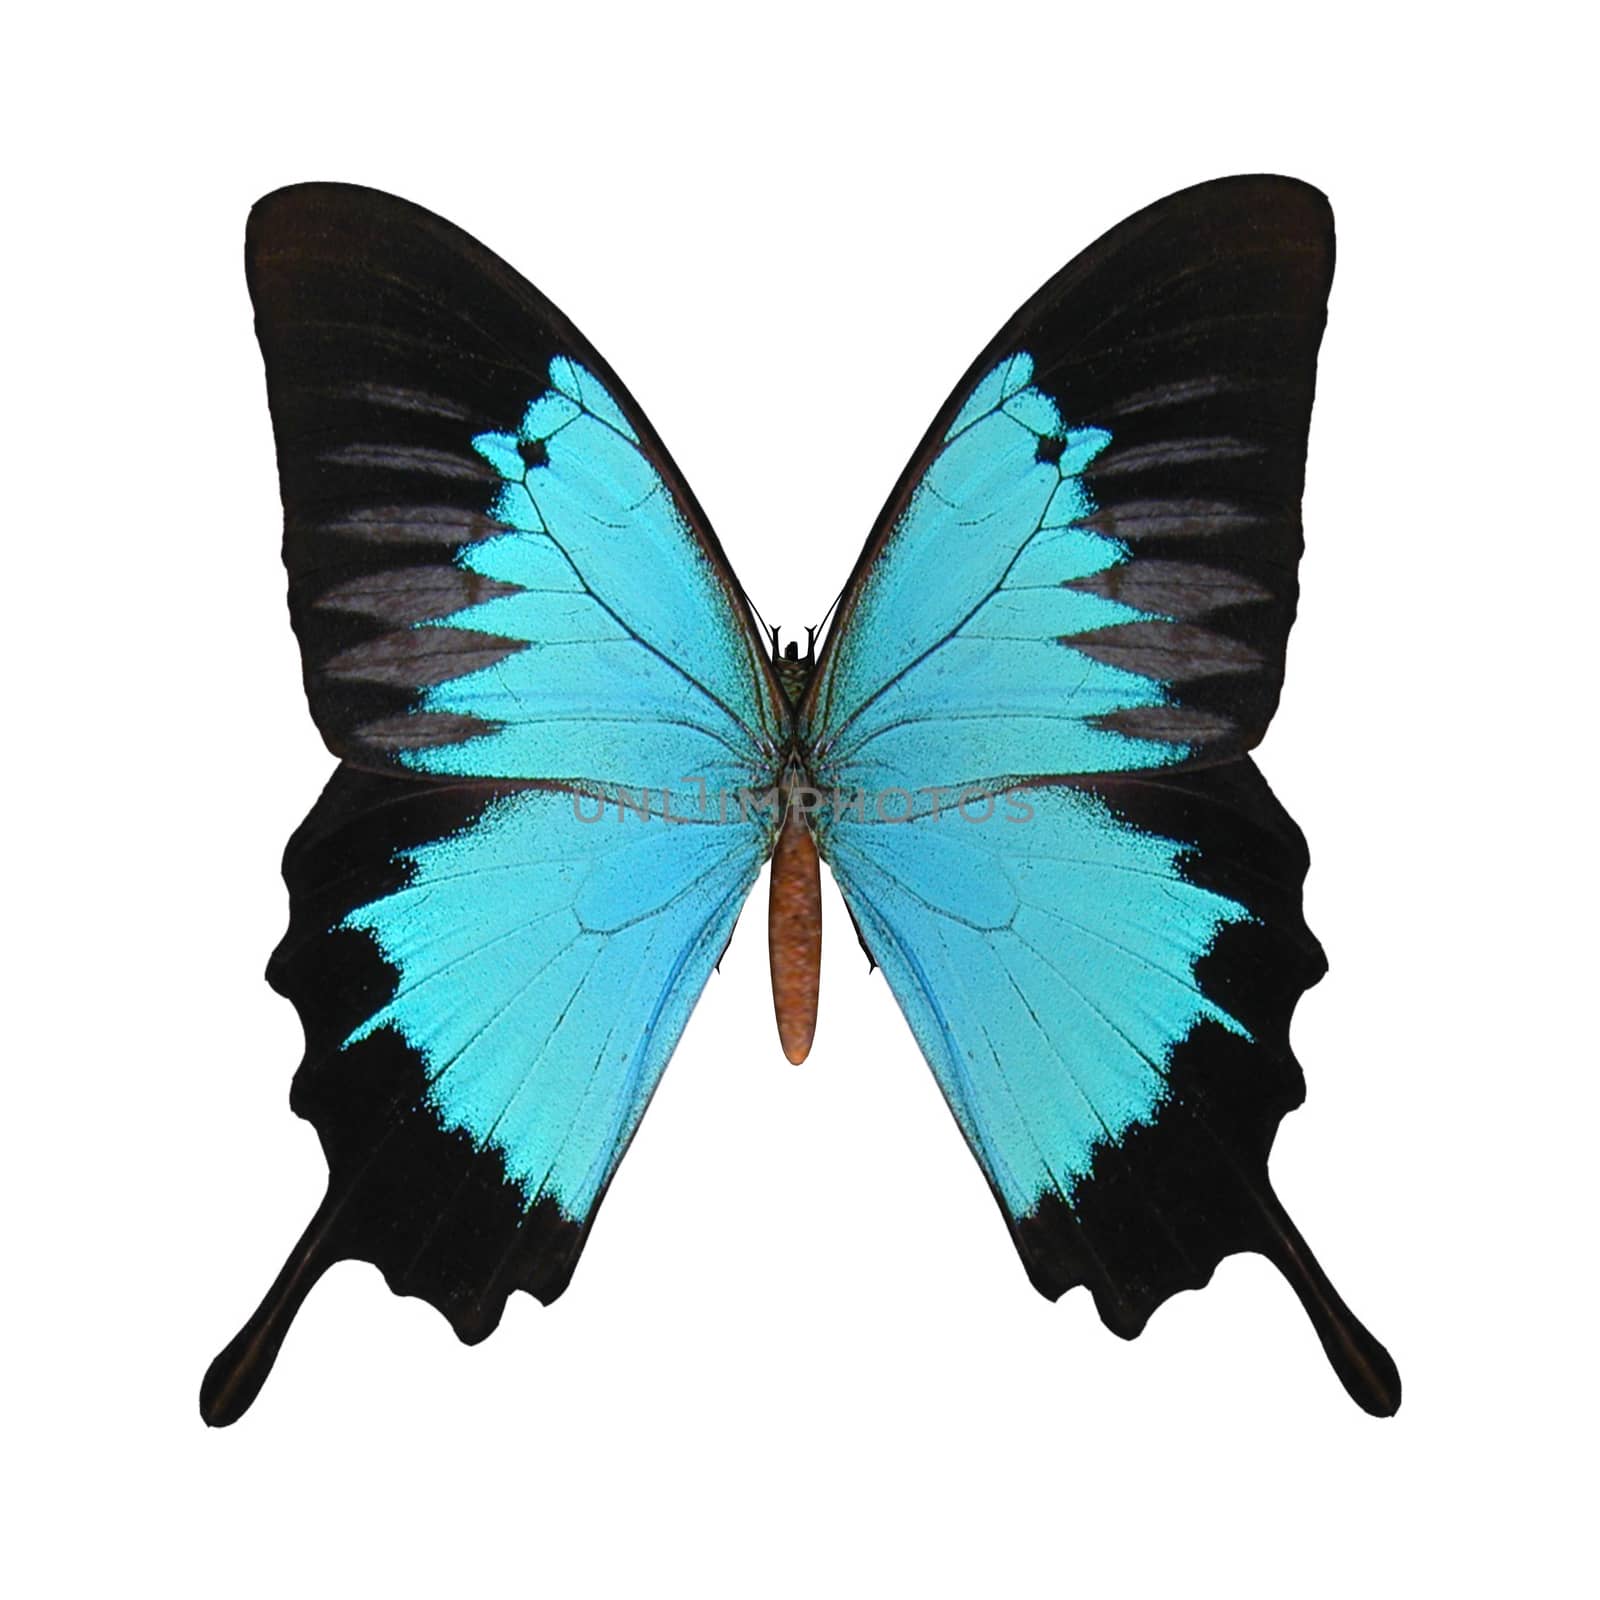 3D digital render of a Peacock Royal , or Tajuria cippus, a species of lycaenid or blue butterfly found in Asia, isolated on white background